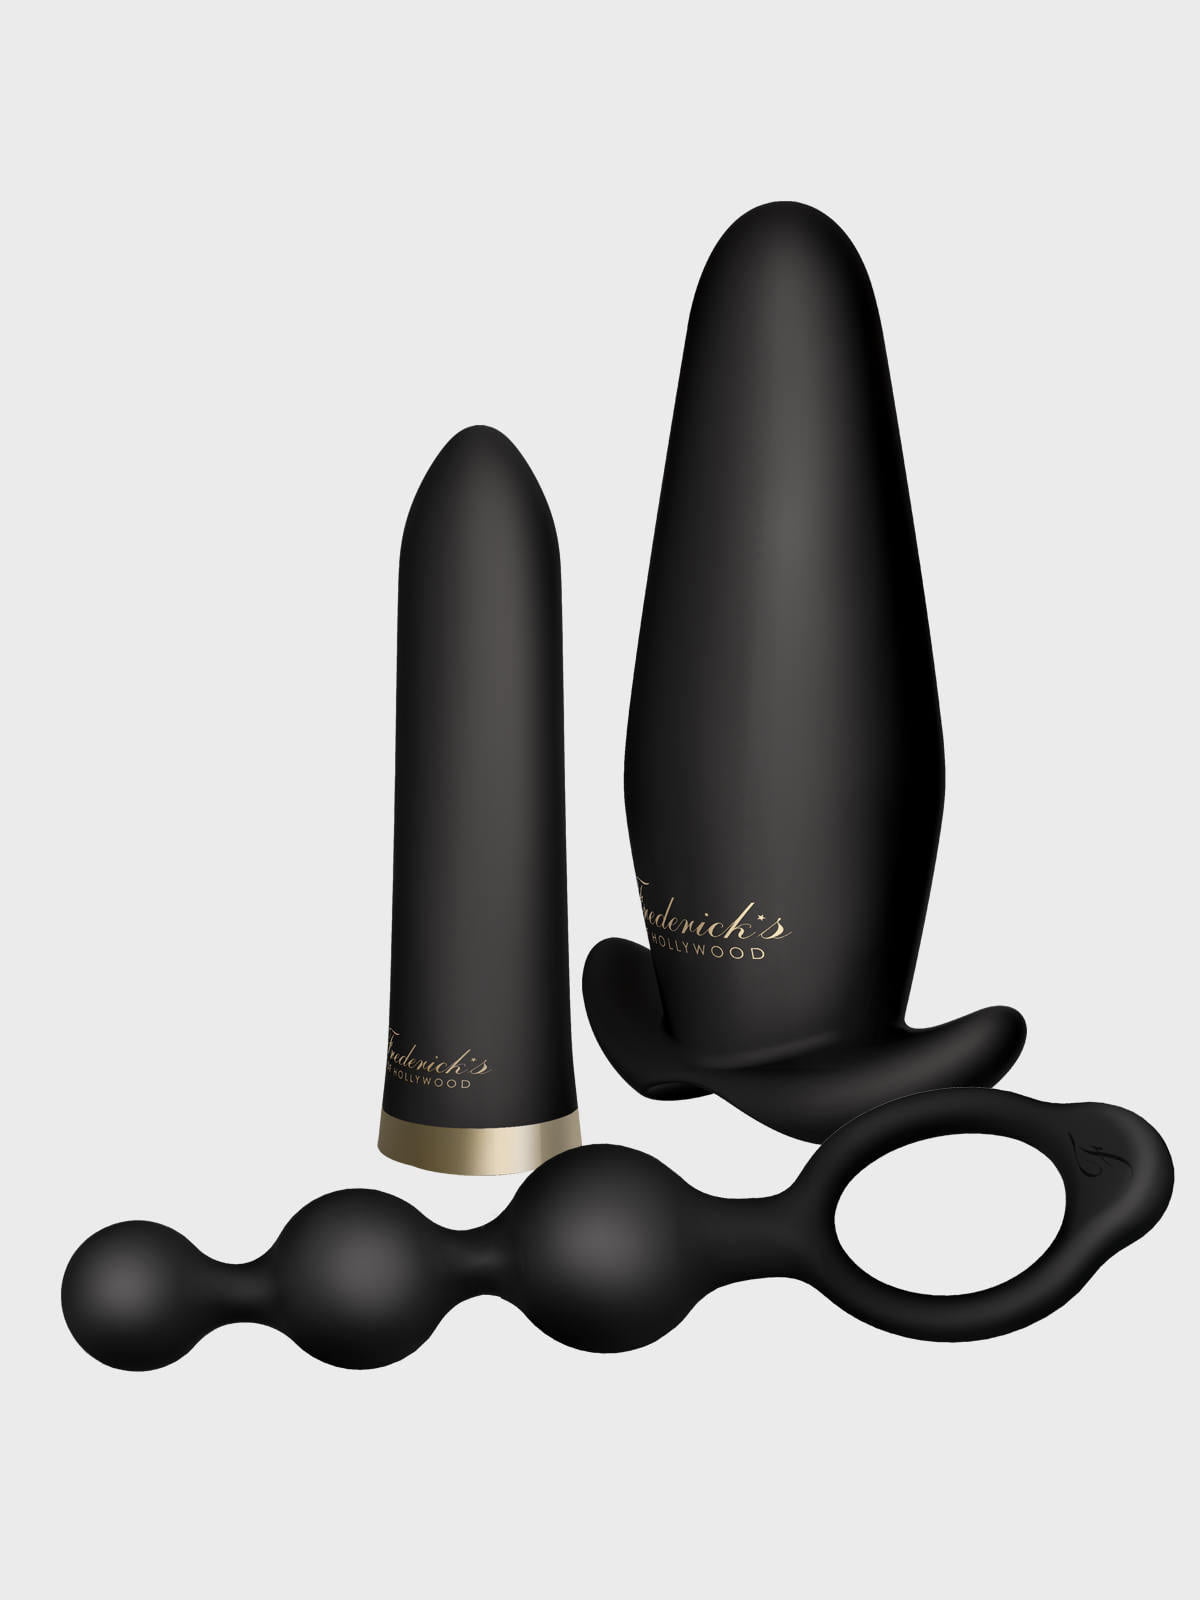 Fredericks of Hollywood – Rechargeable Bullet Vibrator Set with Anal Beads and Butt Plug